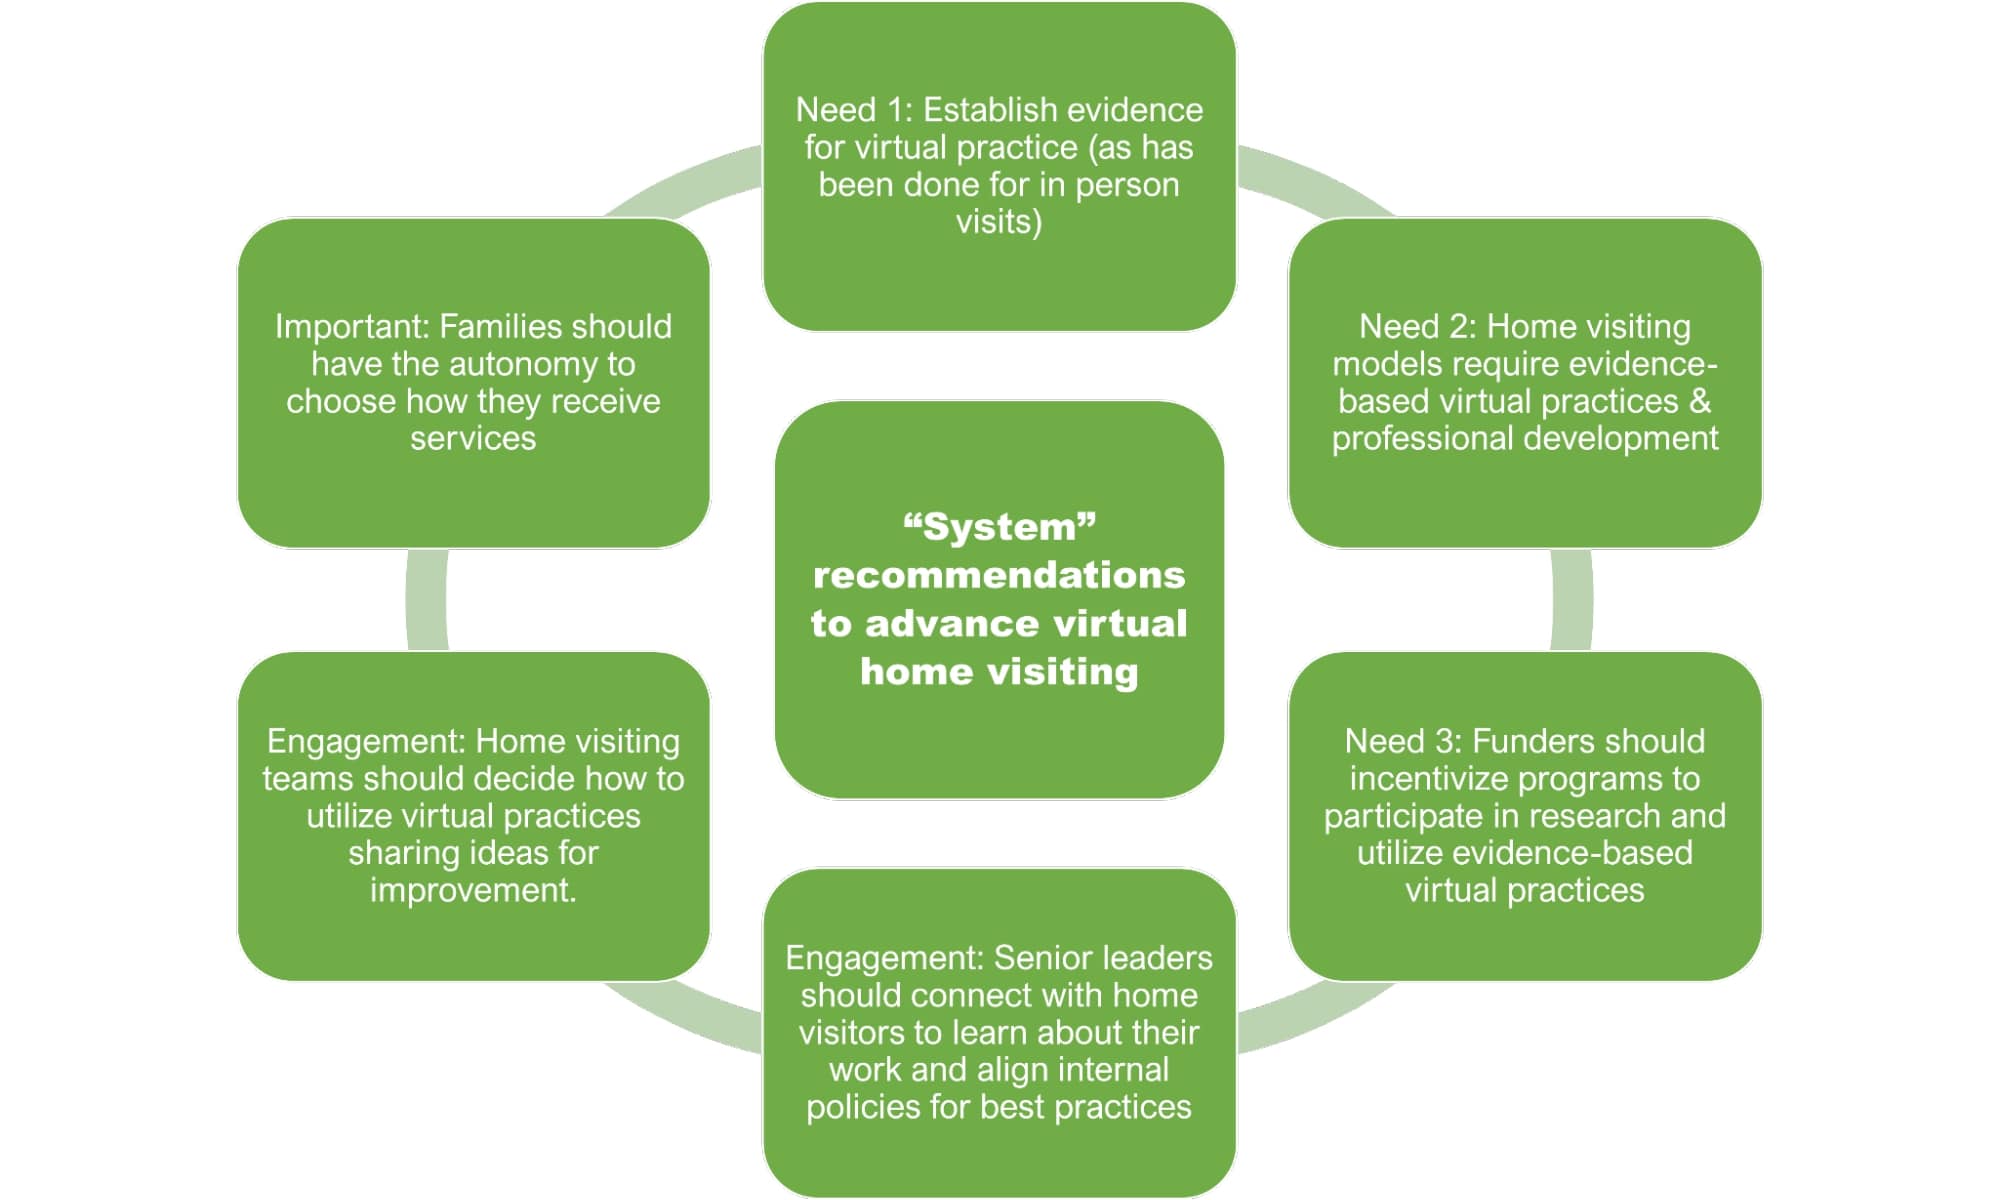 A circle graph. The center of the circle reads "System recommendations to advance virtual home visiting." The circle around the center image reads, clockwise: "Need 1: Establish evidence for virtual practice (as has been done for in person visits). Need 2: Home visitng models require evidence-based virtual practices & professional development. Need 3: Funders should incetivize programs to participate in research and utilize evidence-based virtual practices. Engagement: Senior leader should connect with home visitors to learn about their work and align internal policies for best practices. Engagement: Home visiting teams should decide how to utilize virtual practices sharing ideas for improvement. Important: Families should have the autonomy to choose how they receive services."